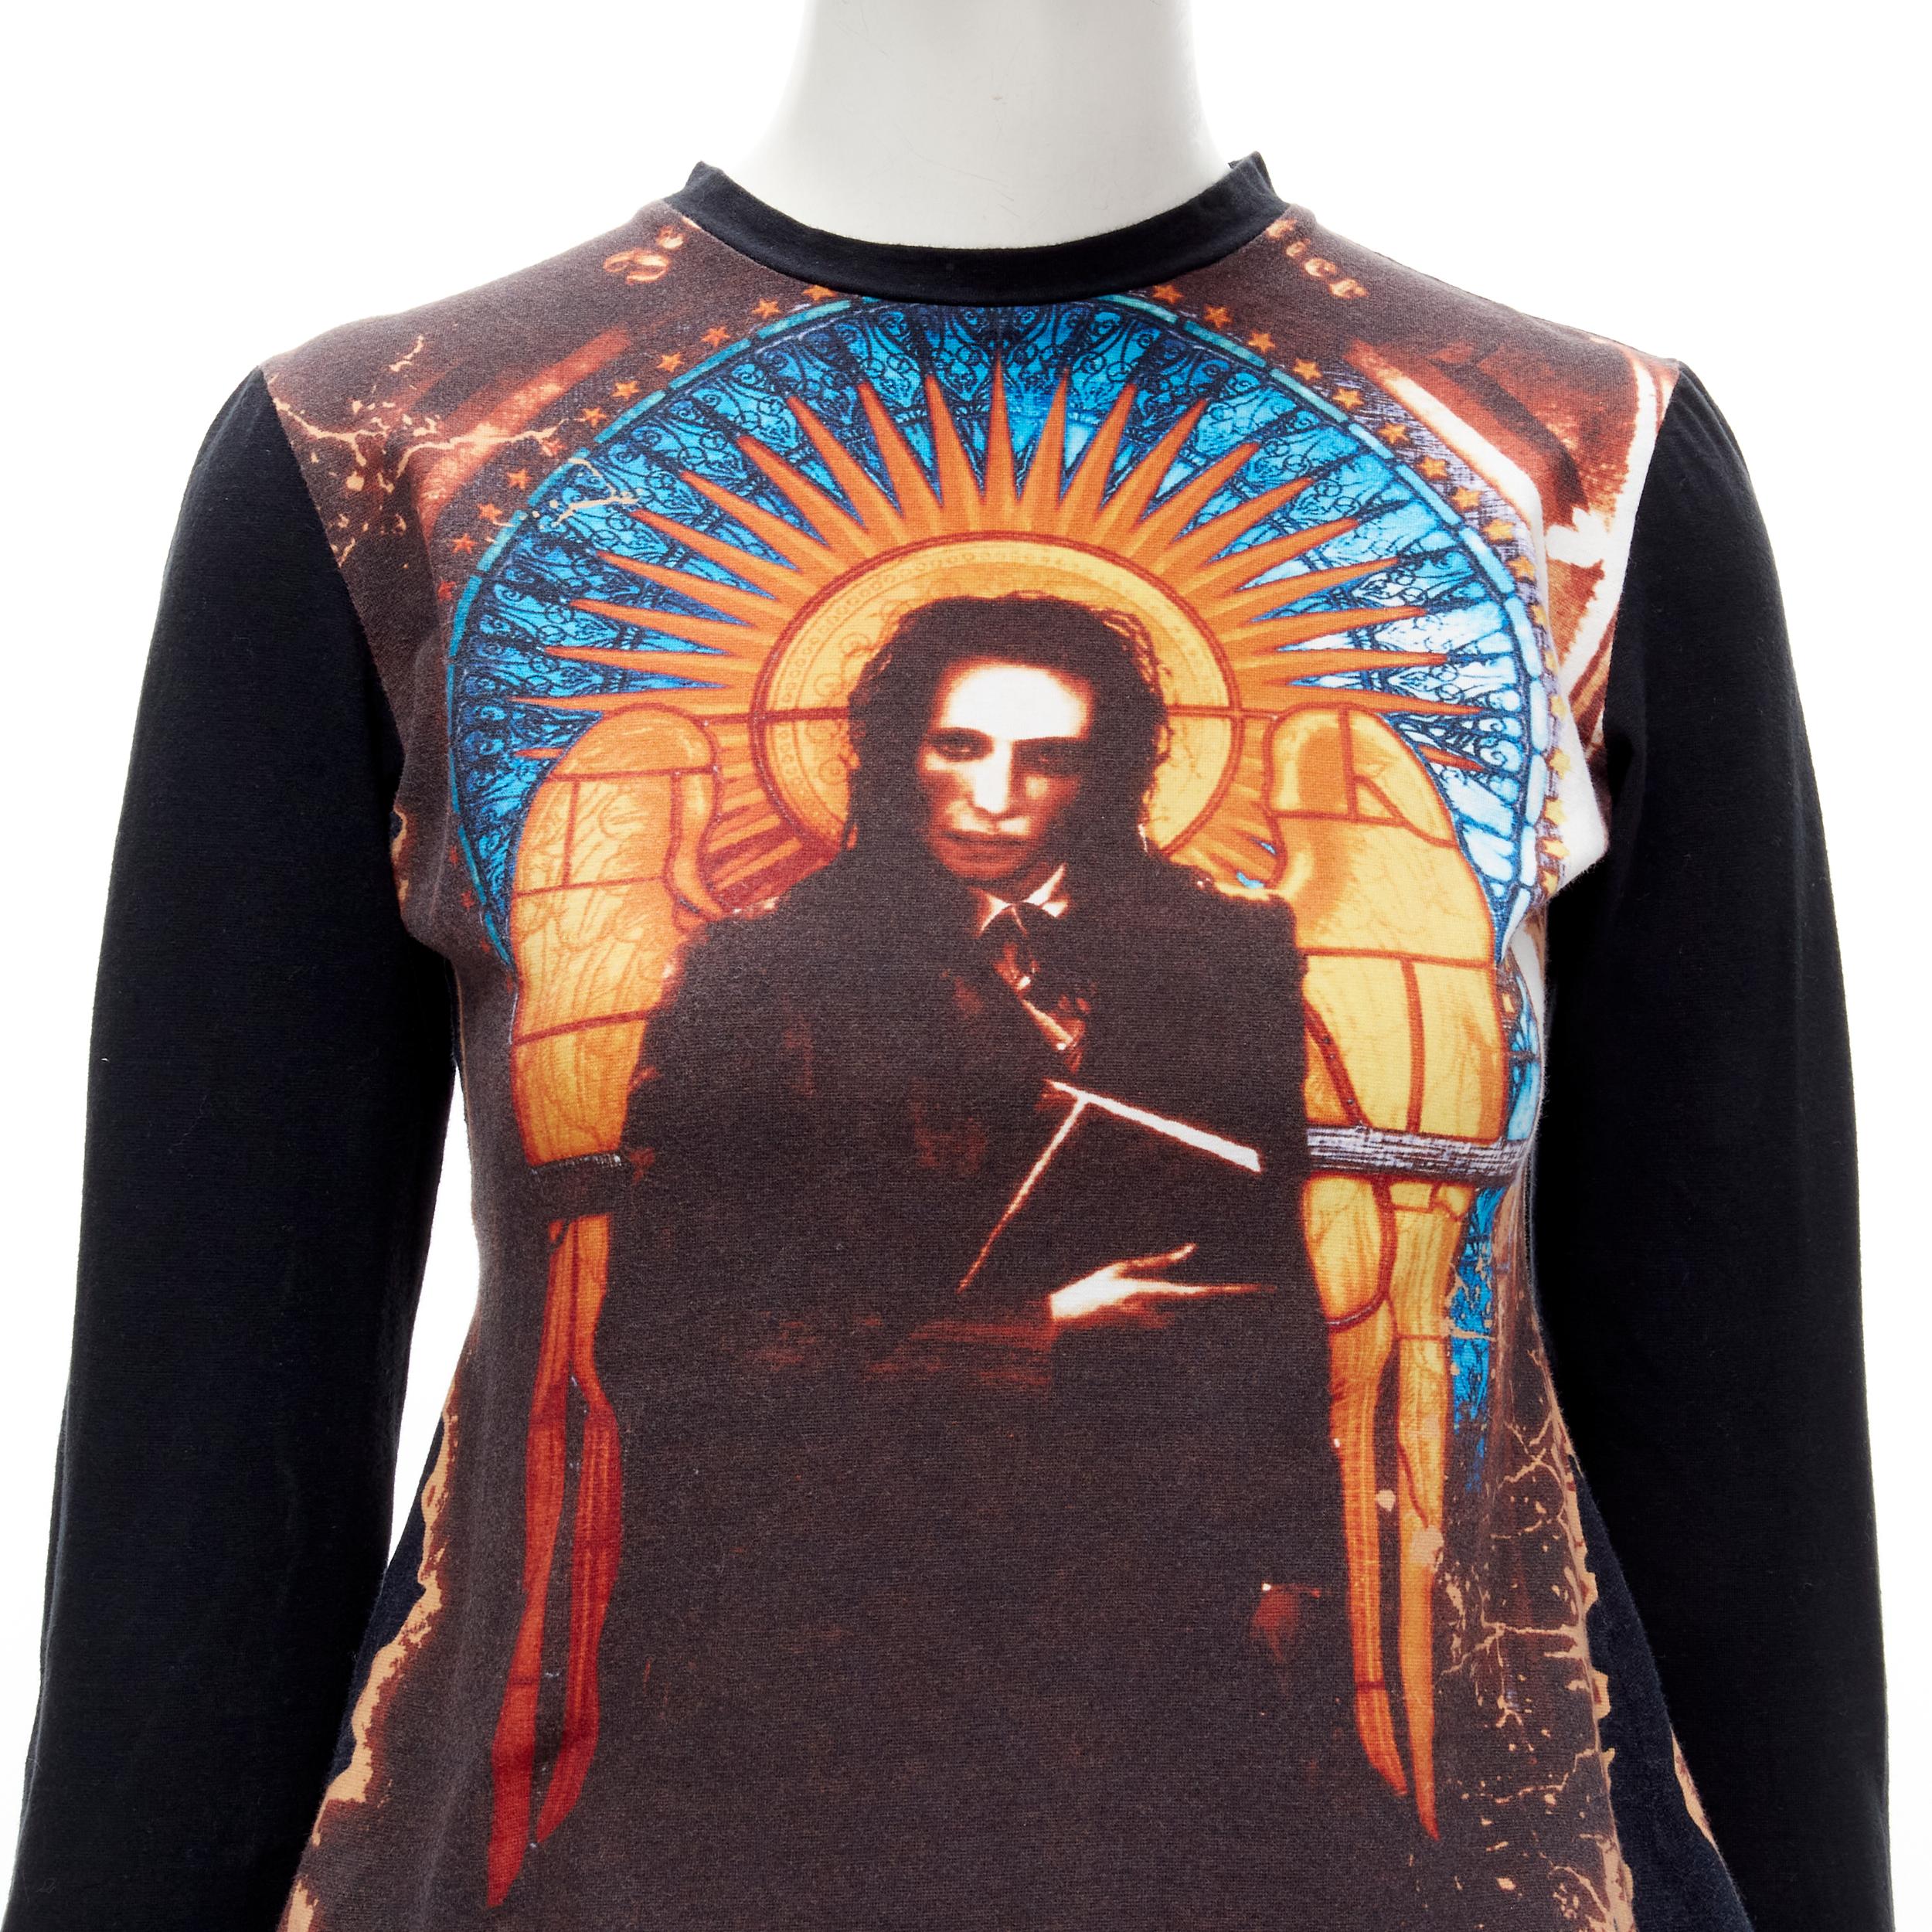 JEAN PAUL GAULTIER 1998 Marilyn Manson cathedral glass goth ringer tshirt IT40 S 2